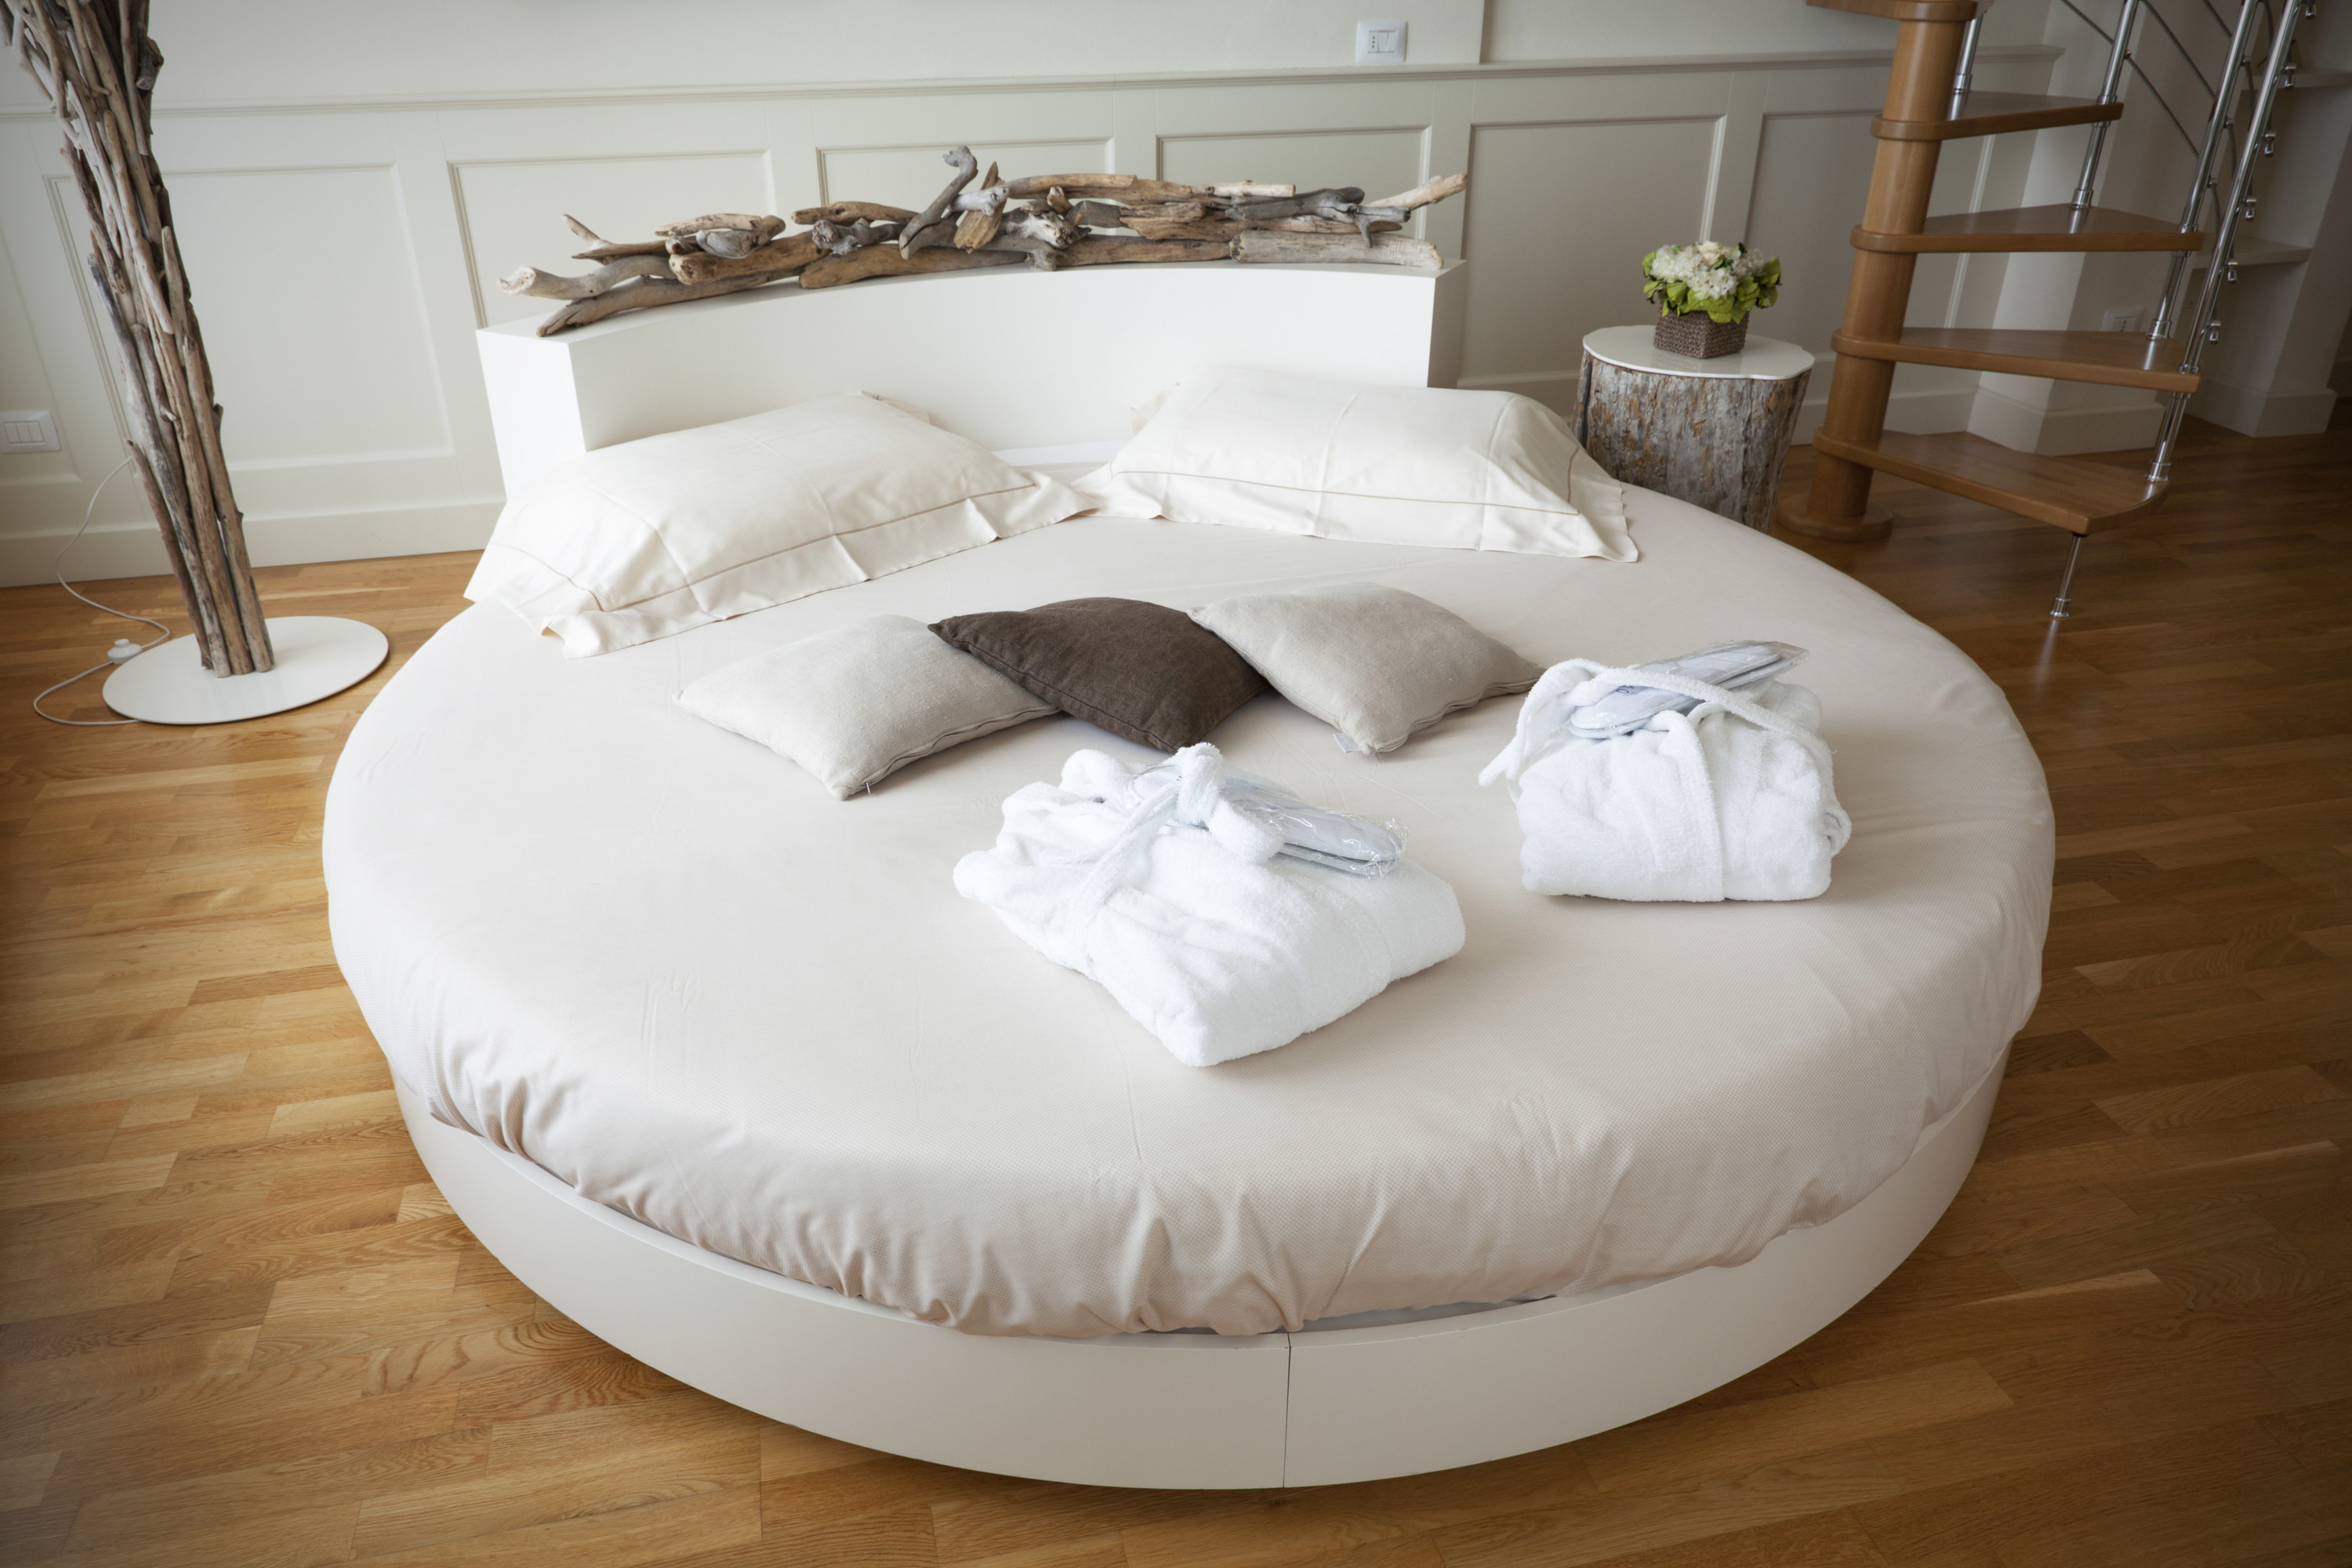 A circular white bed on a timber floor in a modern home